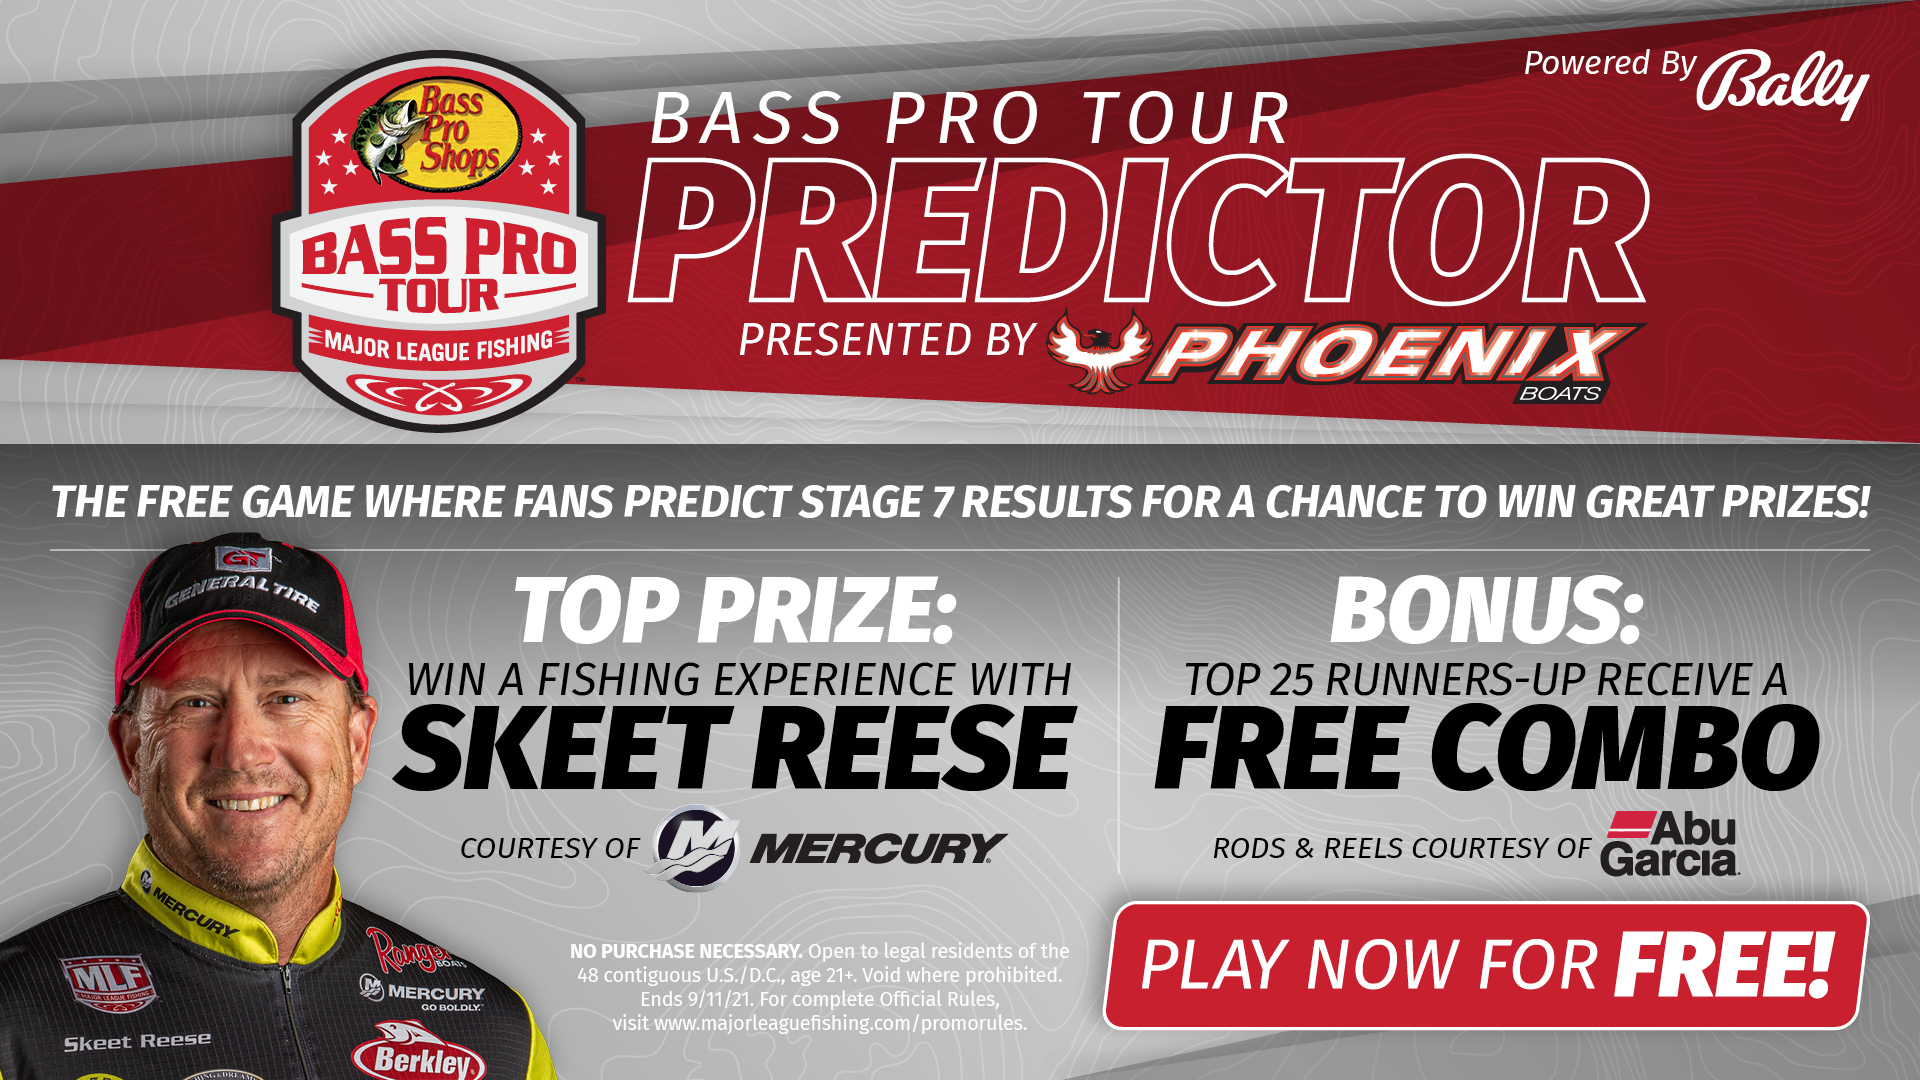 Major League Fishing Launches Free-to-Play Bass Pro Tour PREDICTOR